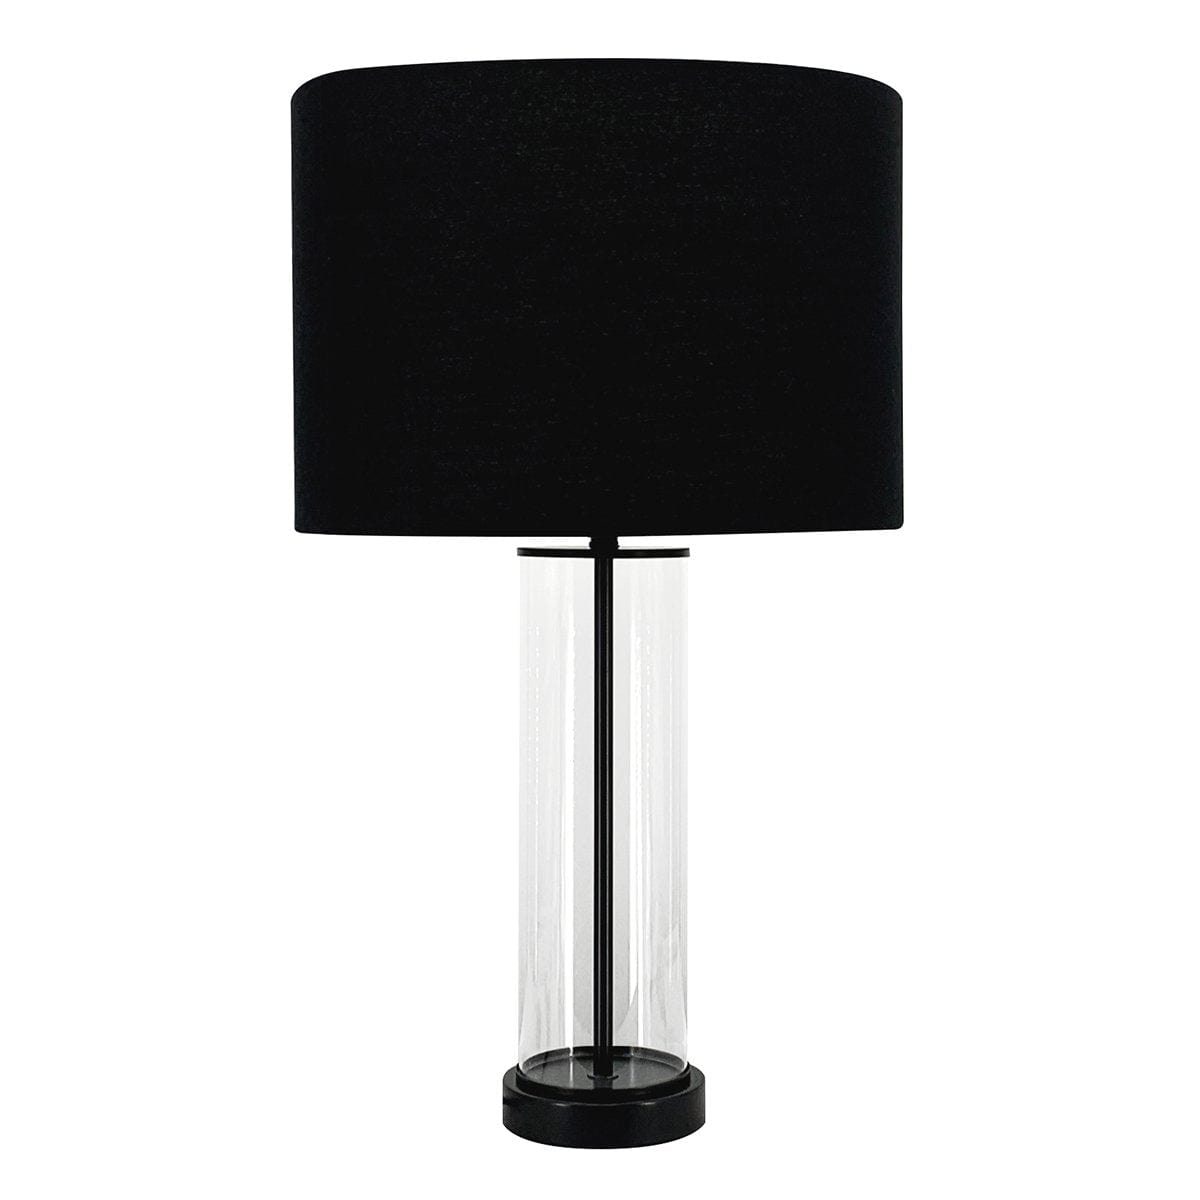 CAFE LIGHTING & LIVING Table Lamp East Side Table Lamp - Black with Black Shade 12207